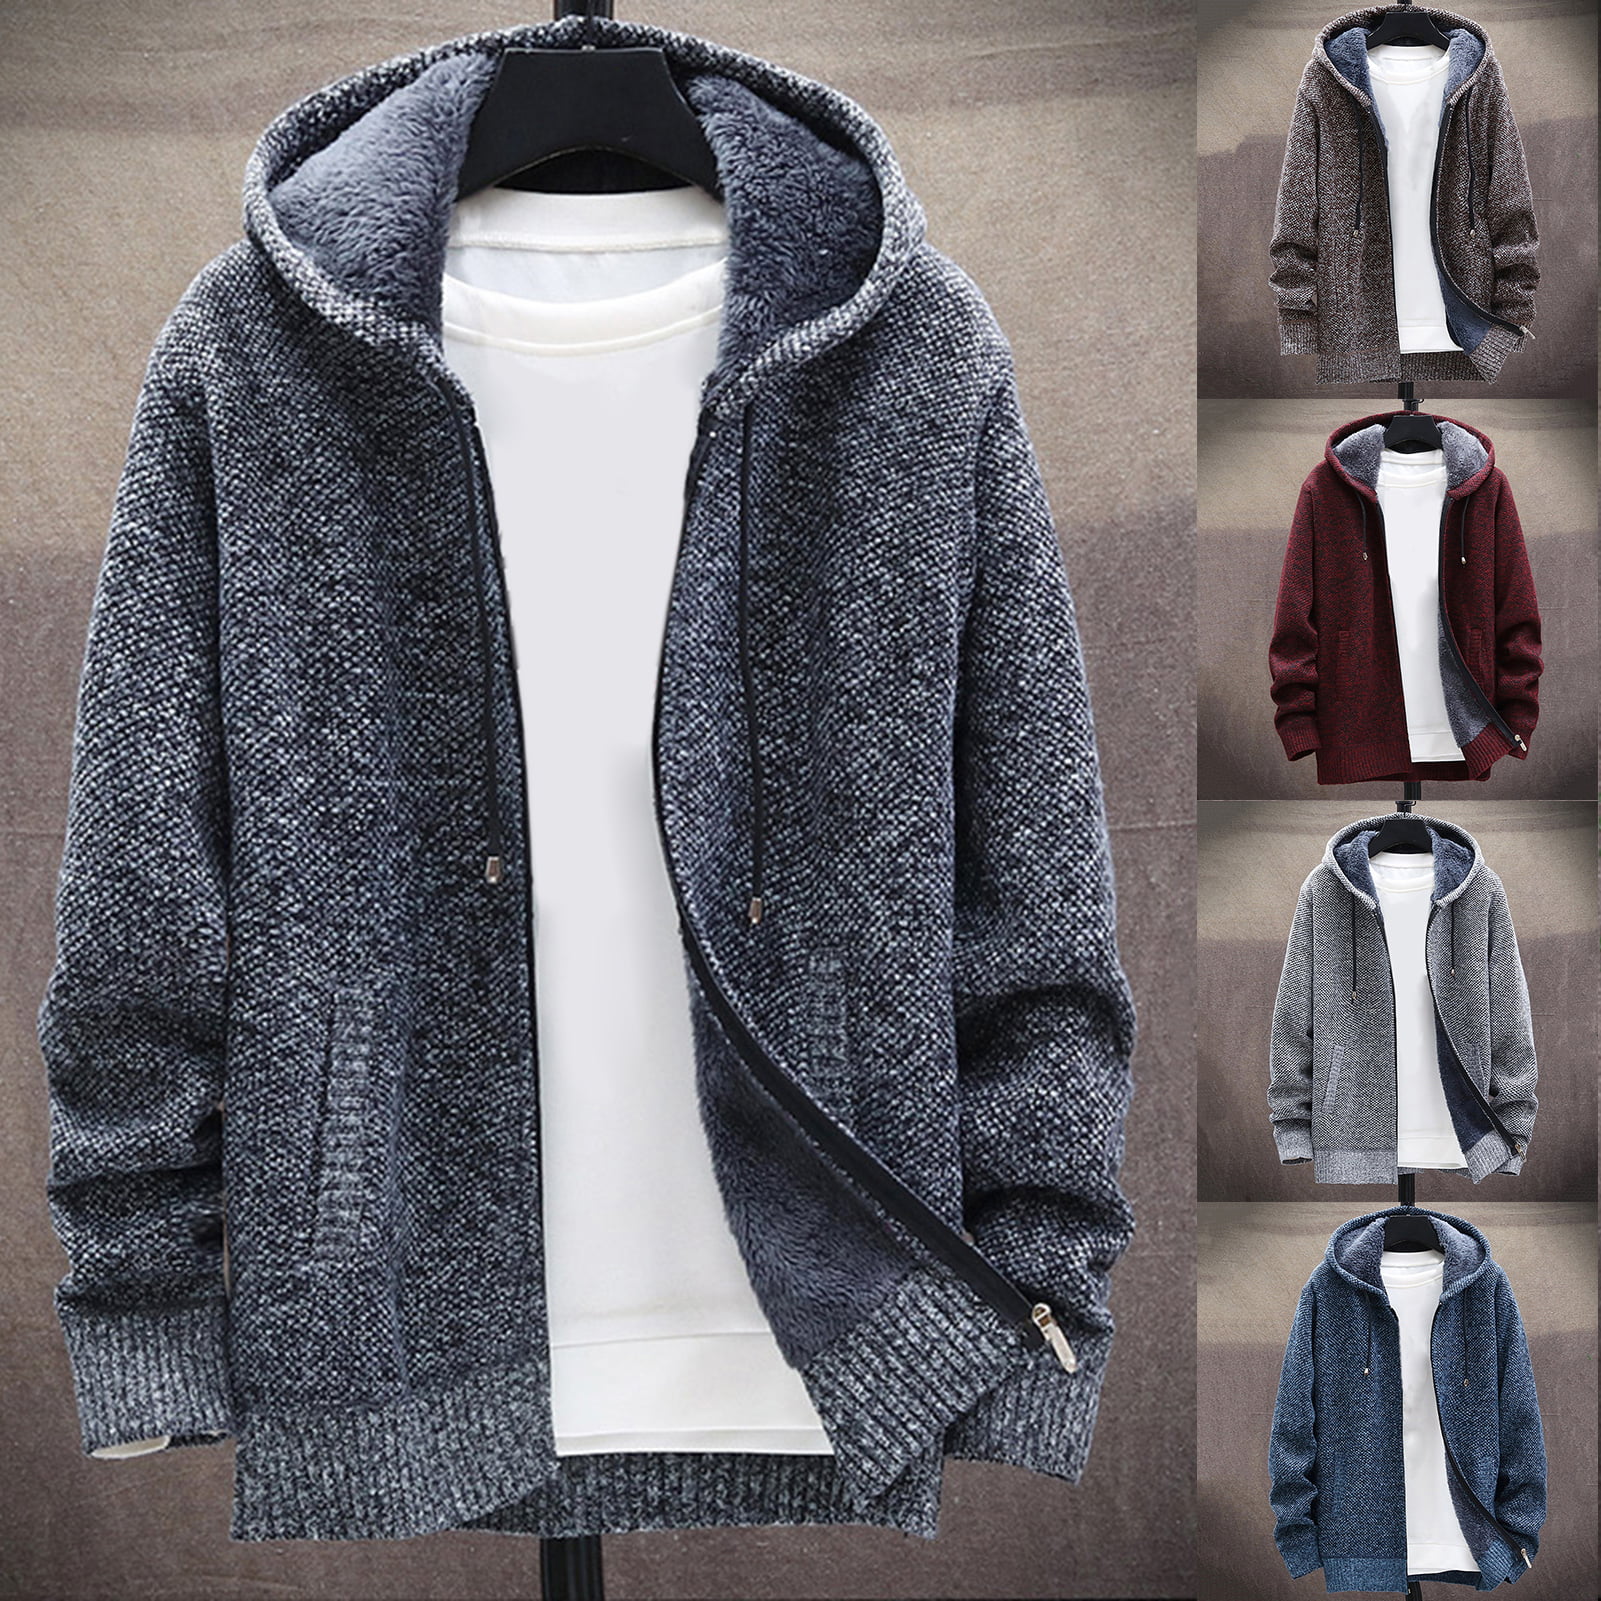 BYWX-Men Knitted Hooded Warm Open Front Long Sleeve Cardigans Sweater 